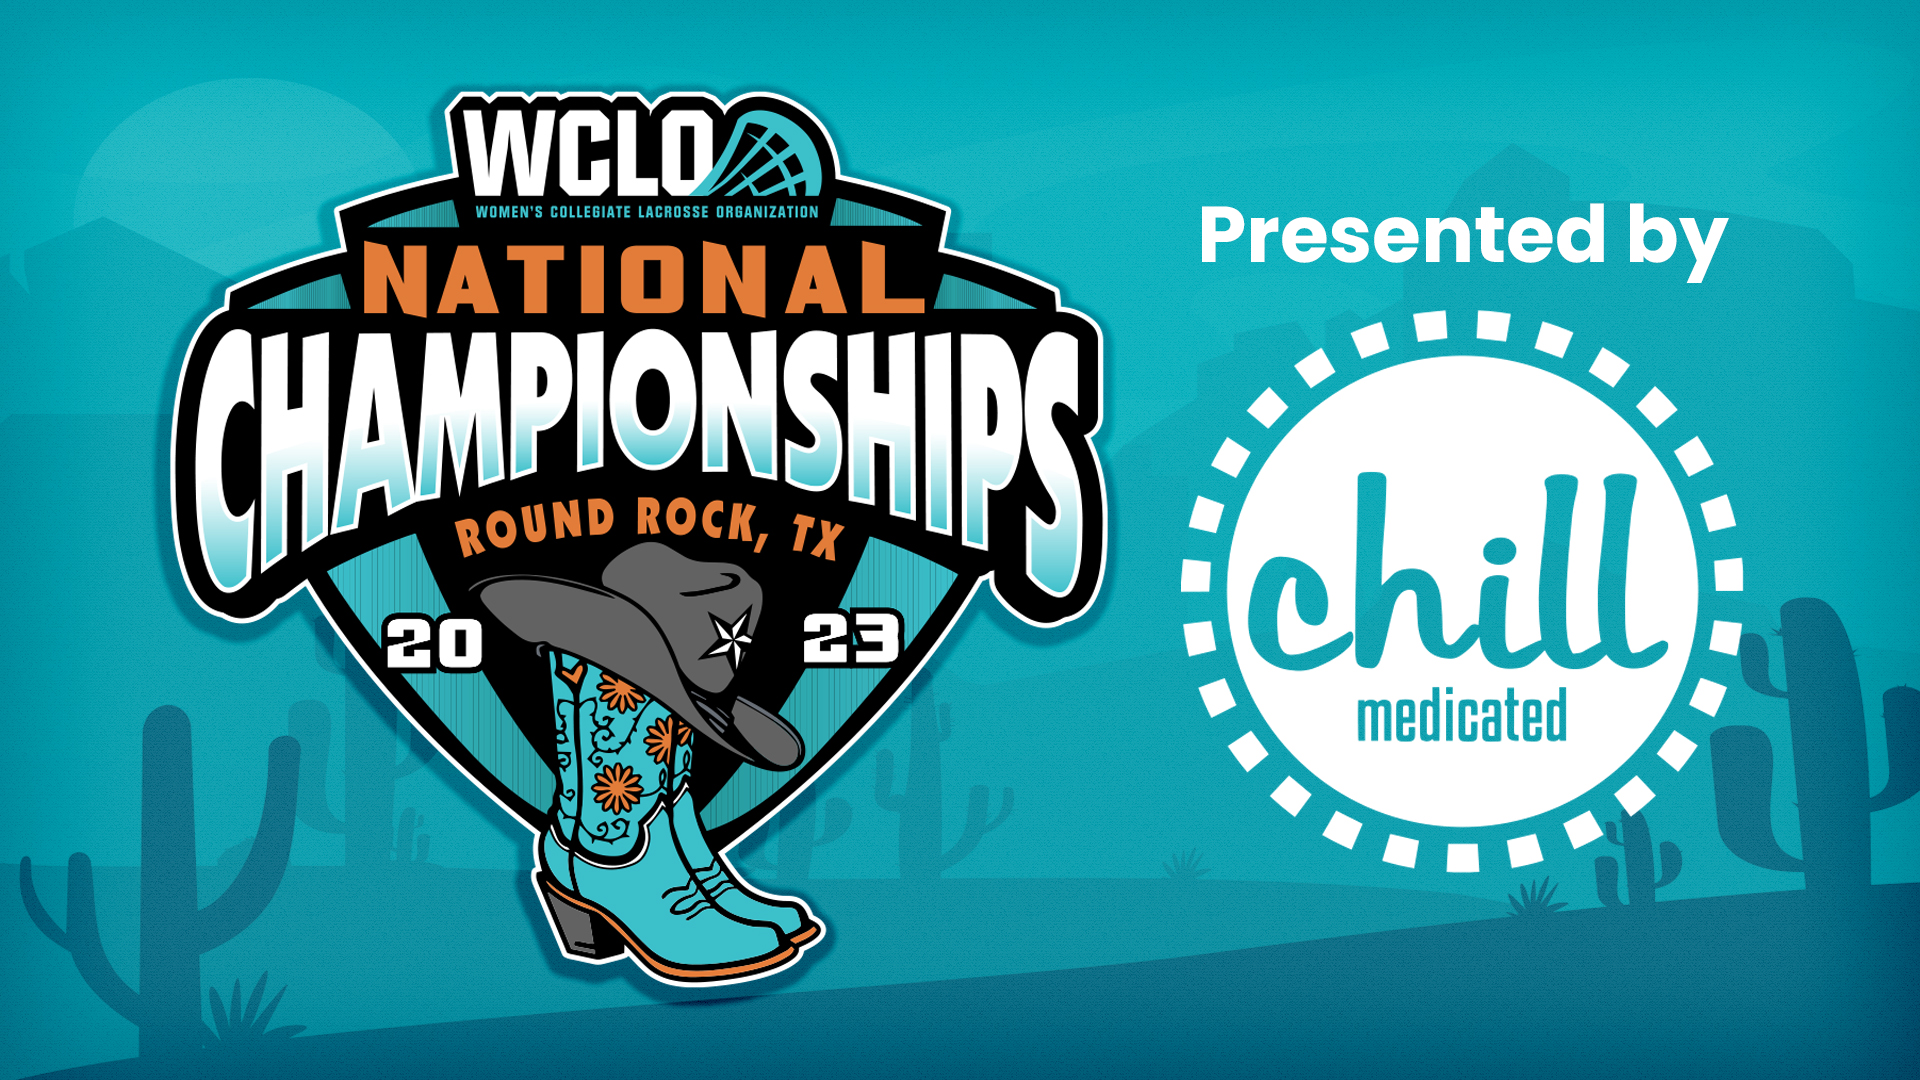 Chill Medicated Breaks Barriers as the First Cannabis Brand to Officially Sponsor 2023 WCLO Championship in Round Rock, Texas